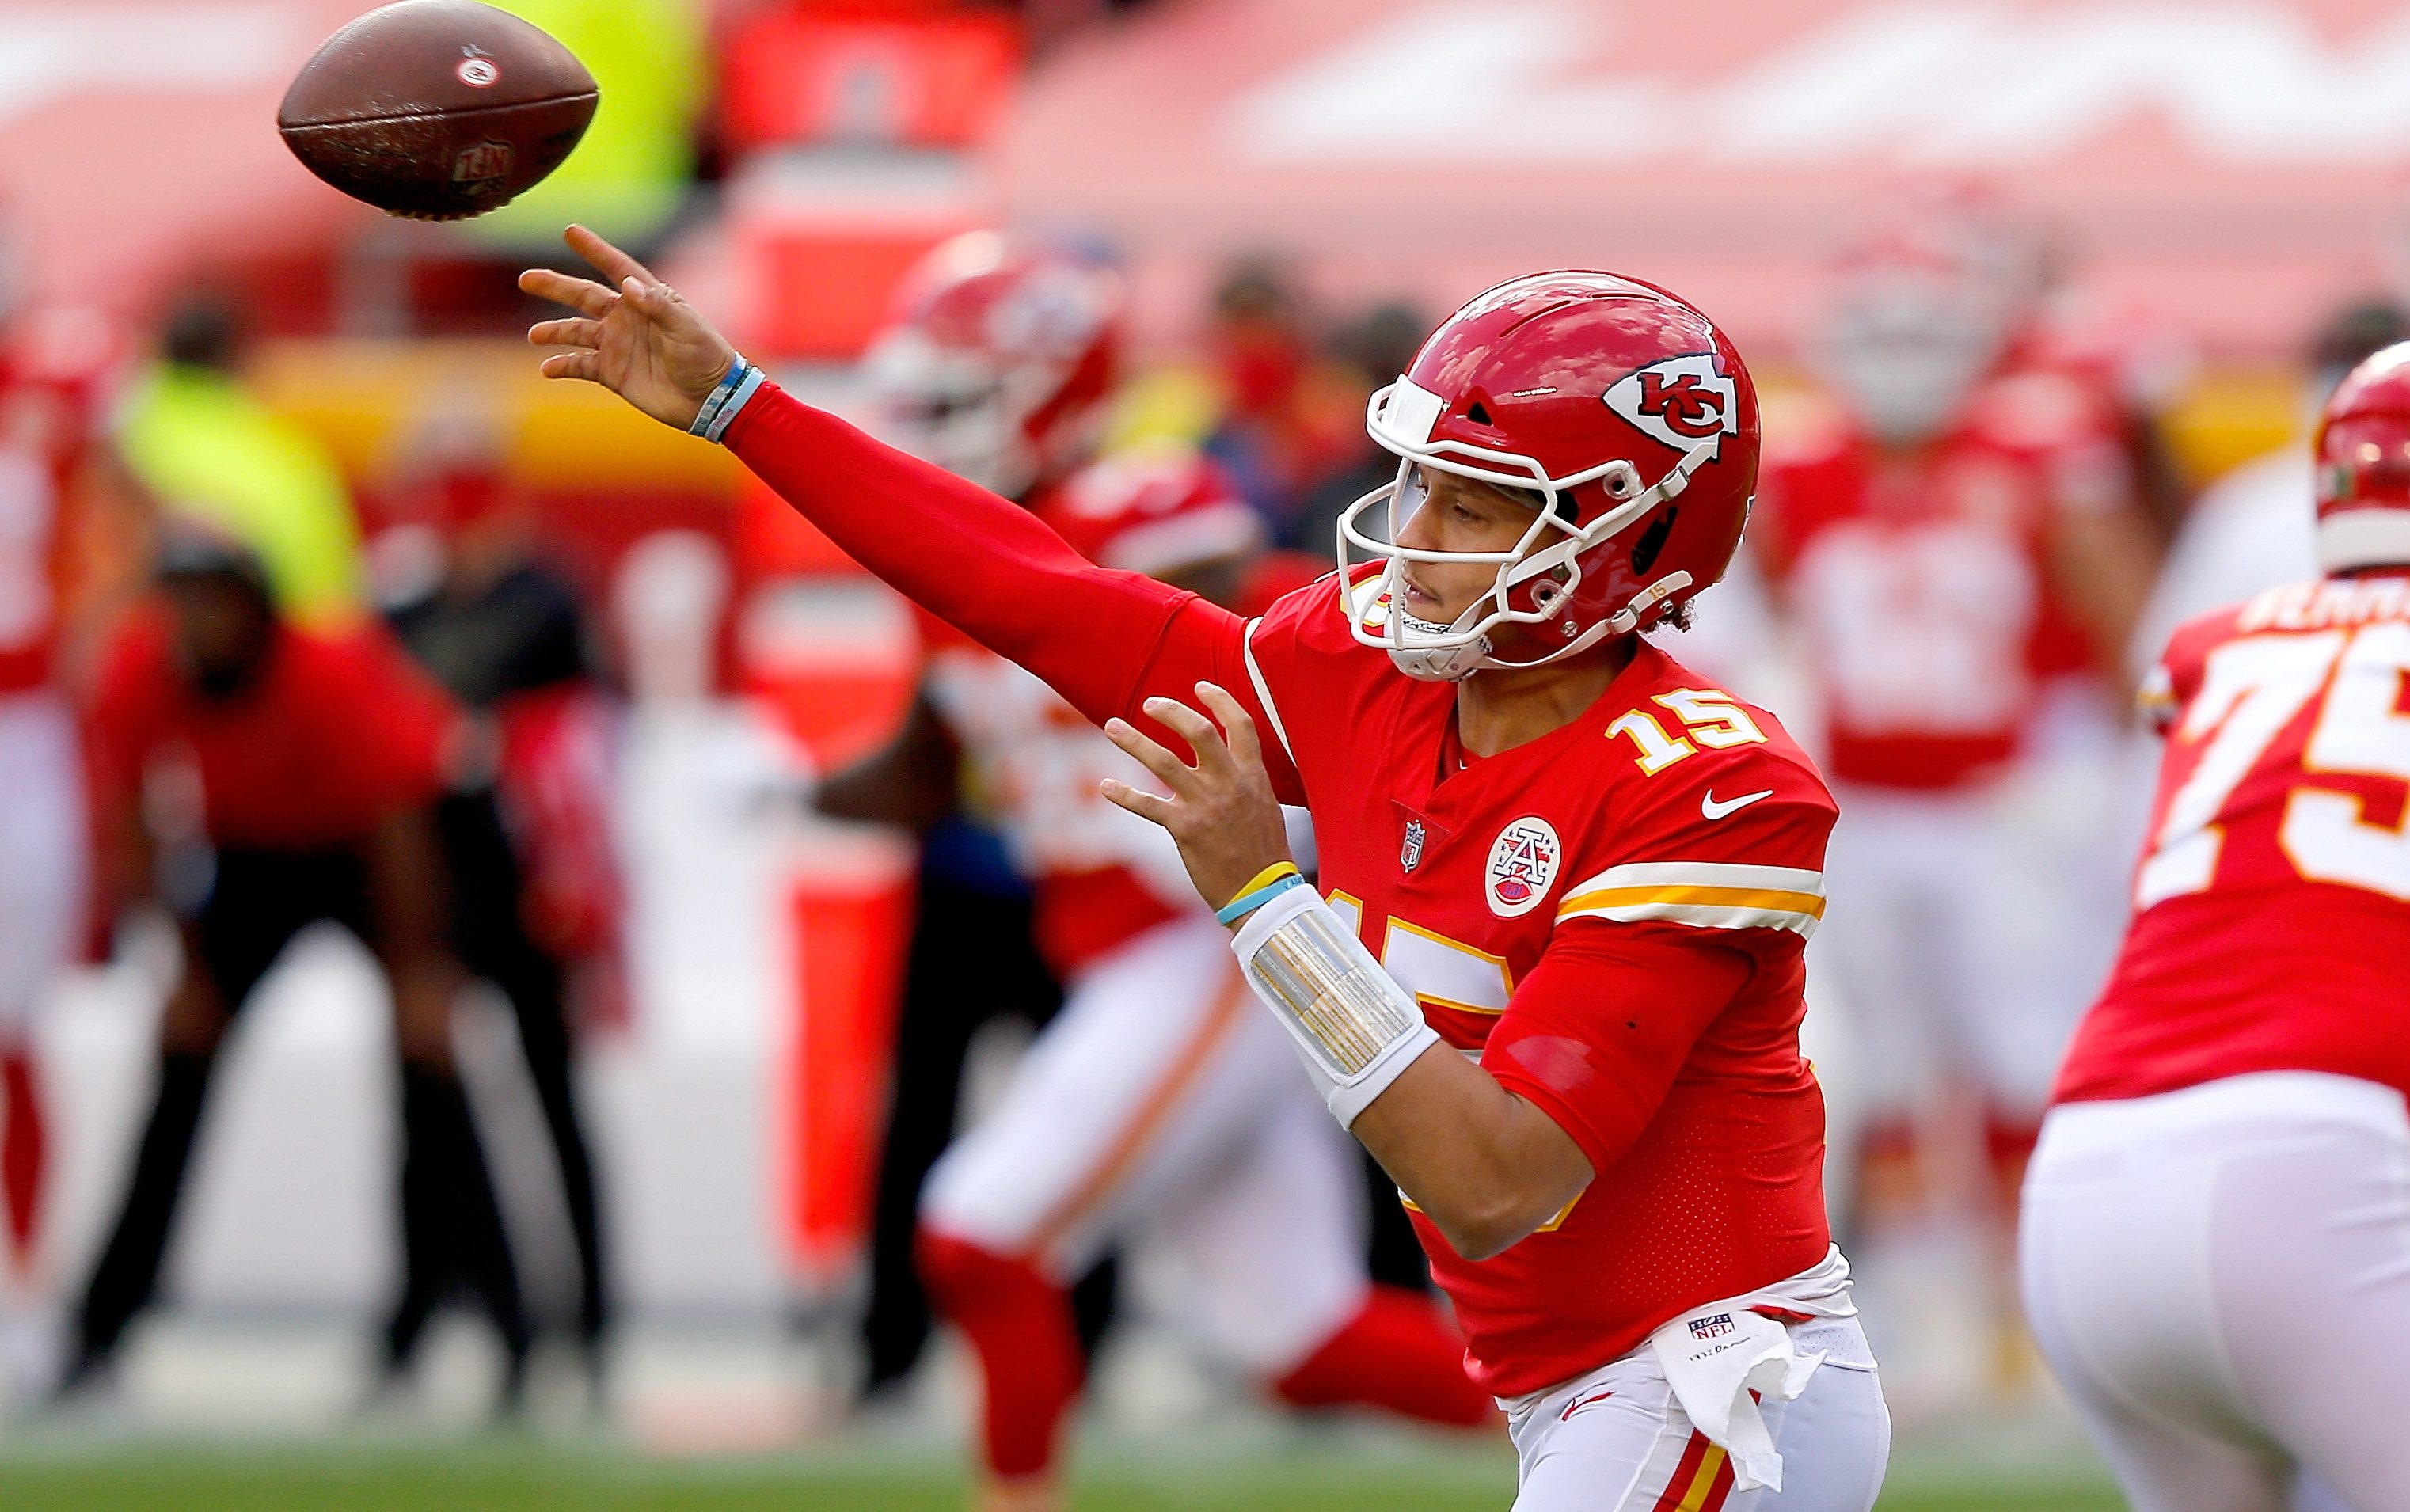 Chiefs vs Raiders Live Stream How to Watch Online